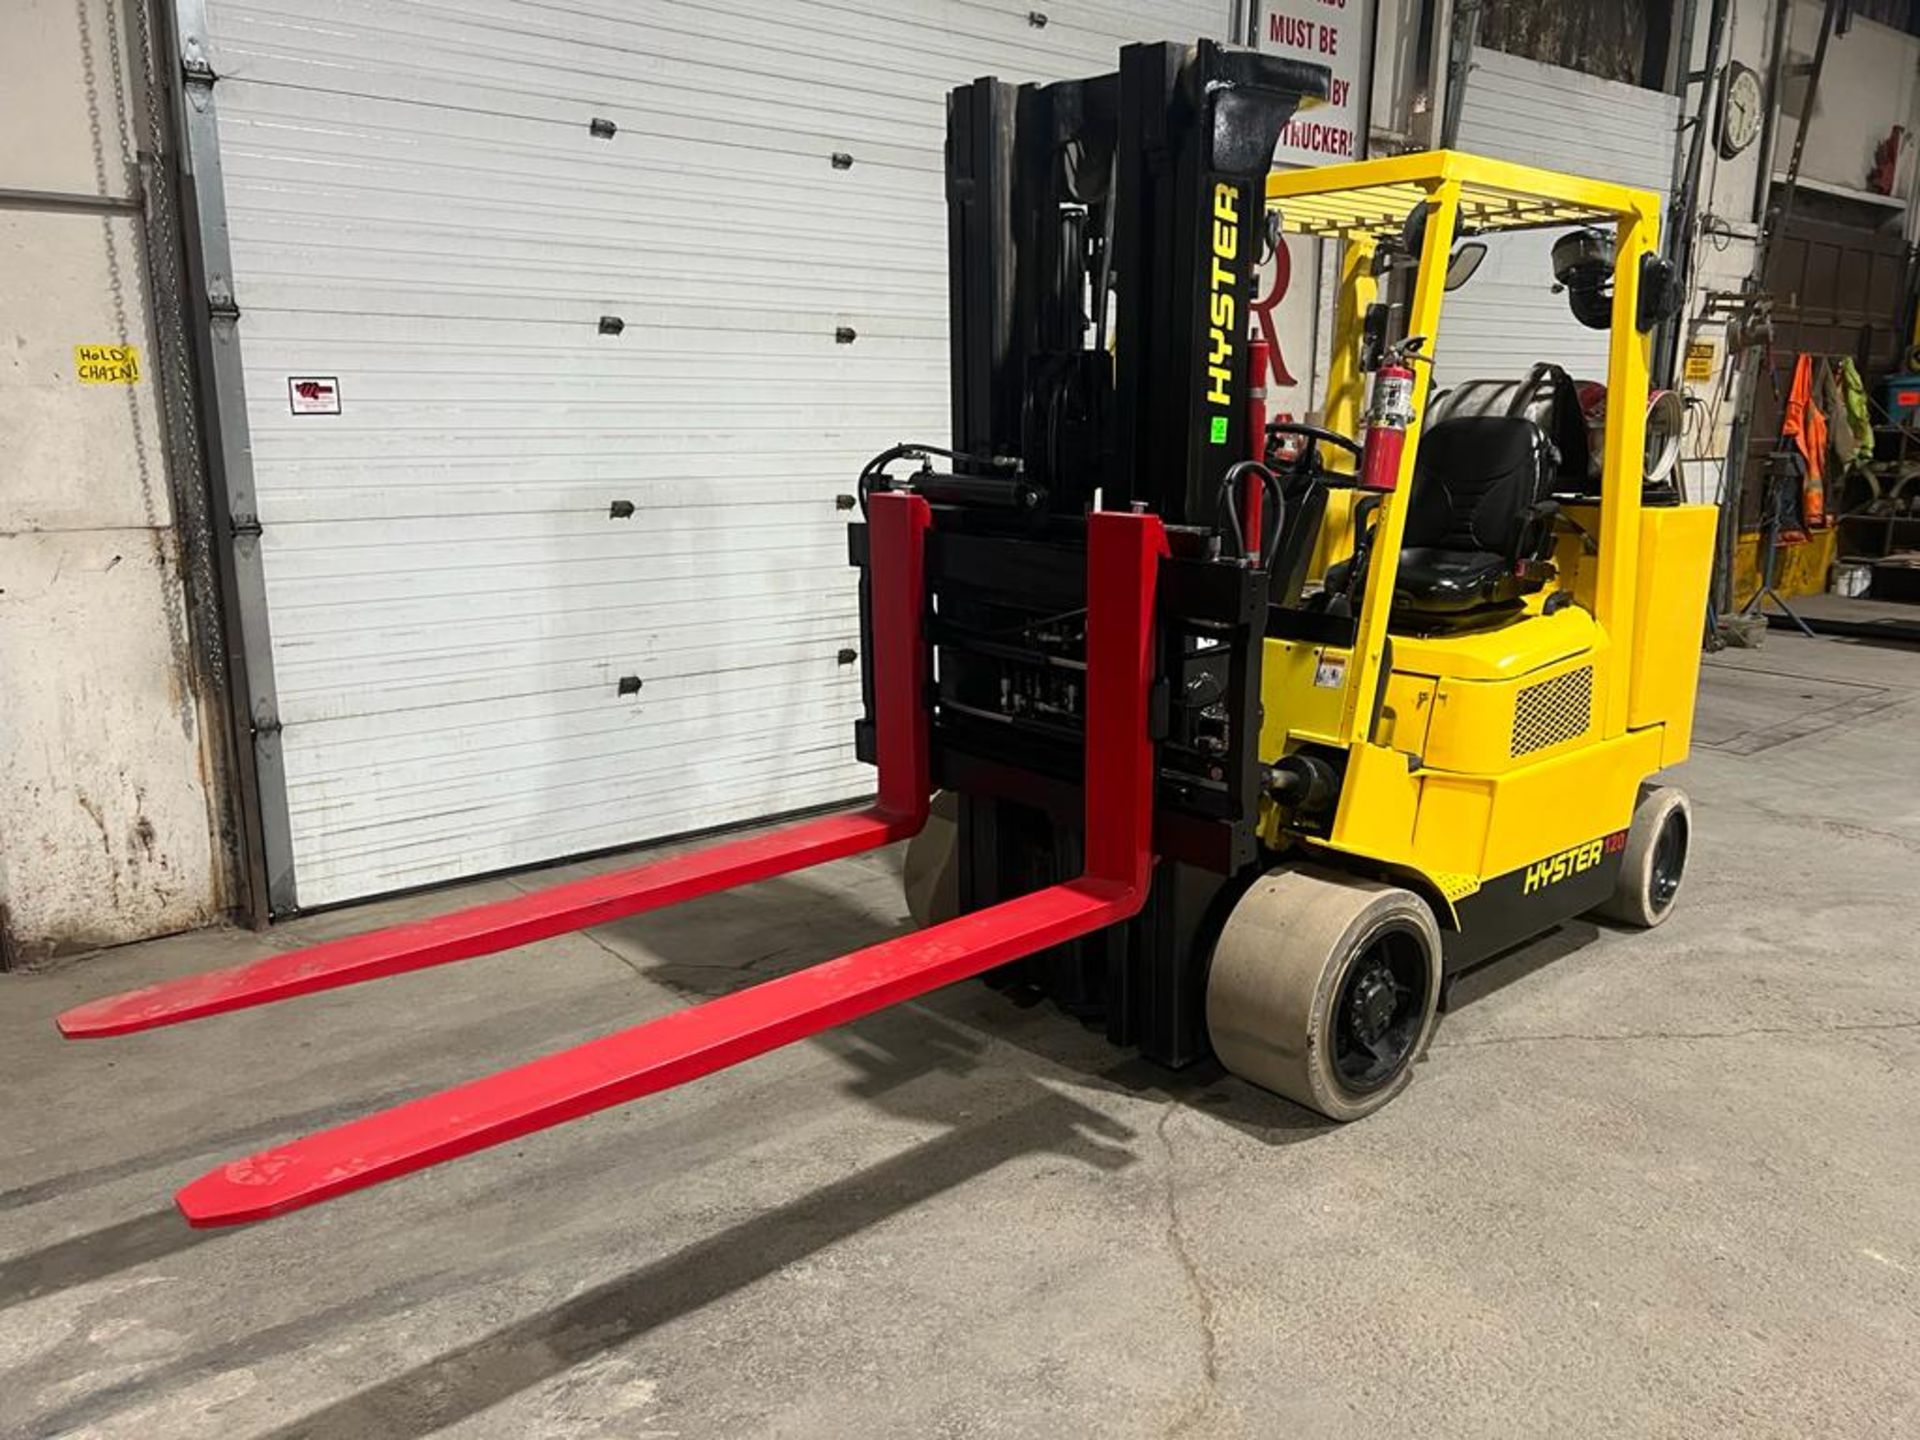 NICE Hyster 12,000lbs Capacity Forklift NEW 72" Forks Box Car Special LPG (Propane) - Image 2 of 3